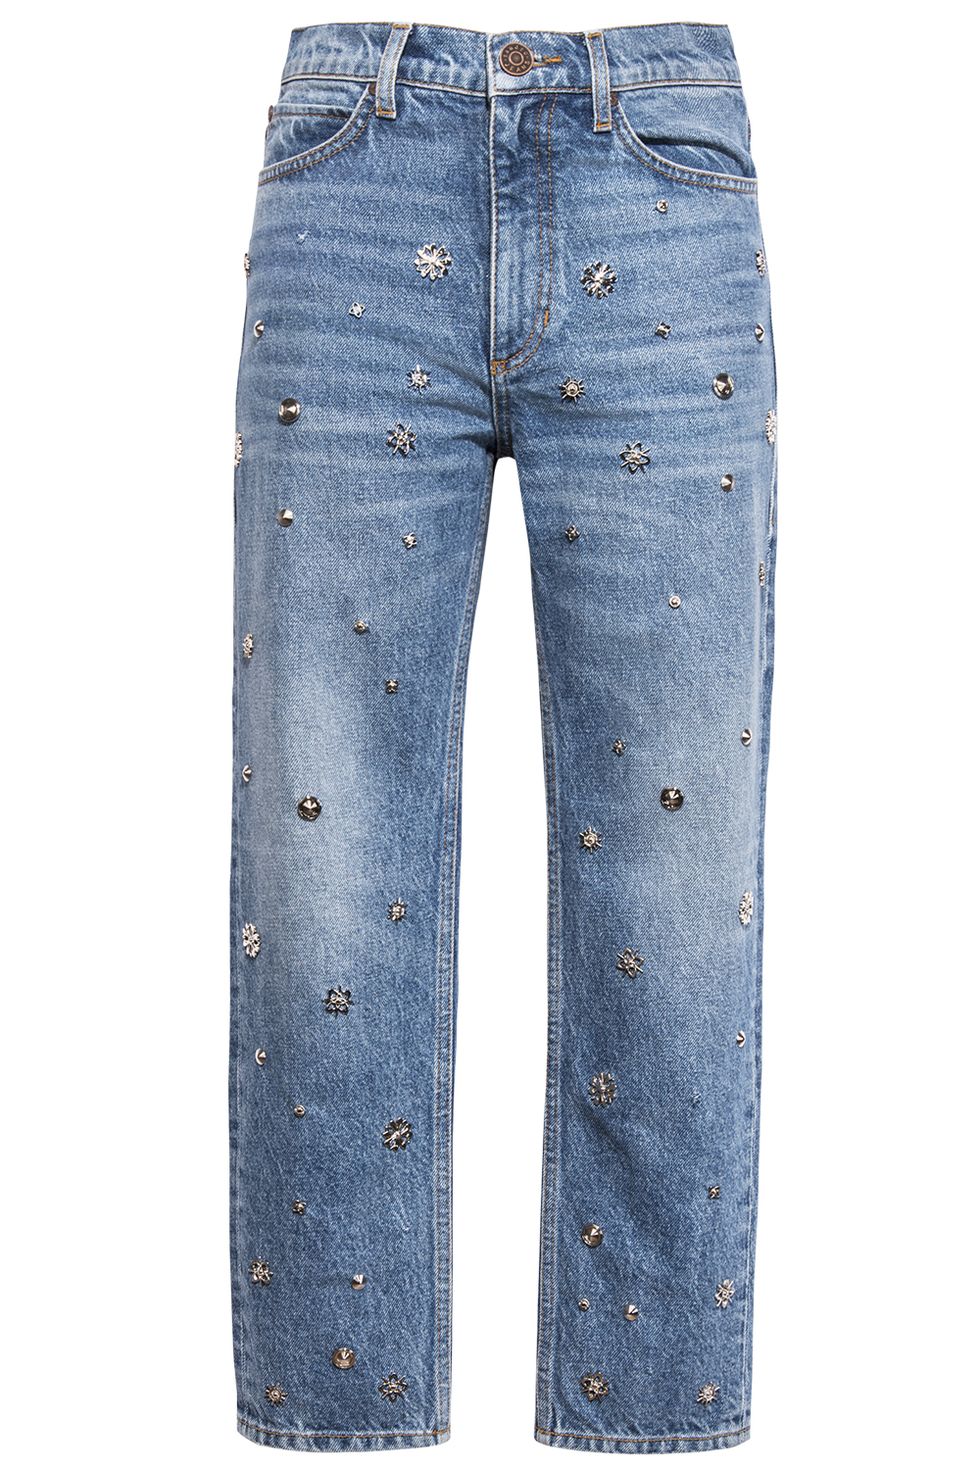 <p>"Denim jeans! I don't even know how many pairs I actually own. It's a key piece that's always a great start to an outfit, and it can be endlessly mixed depending on your mood." <em data-redactor-tag="em" data-verified="redactor">—Evelyne</em></p><p><em data-redactor-tag="em" data-verified="redactor">Sandro jeans, $395, <a href="http://sandro.com/" target="_blank" data-tracking-id="recirc-text-link">sandro.com</a>.</em></p>